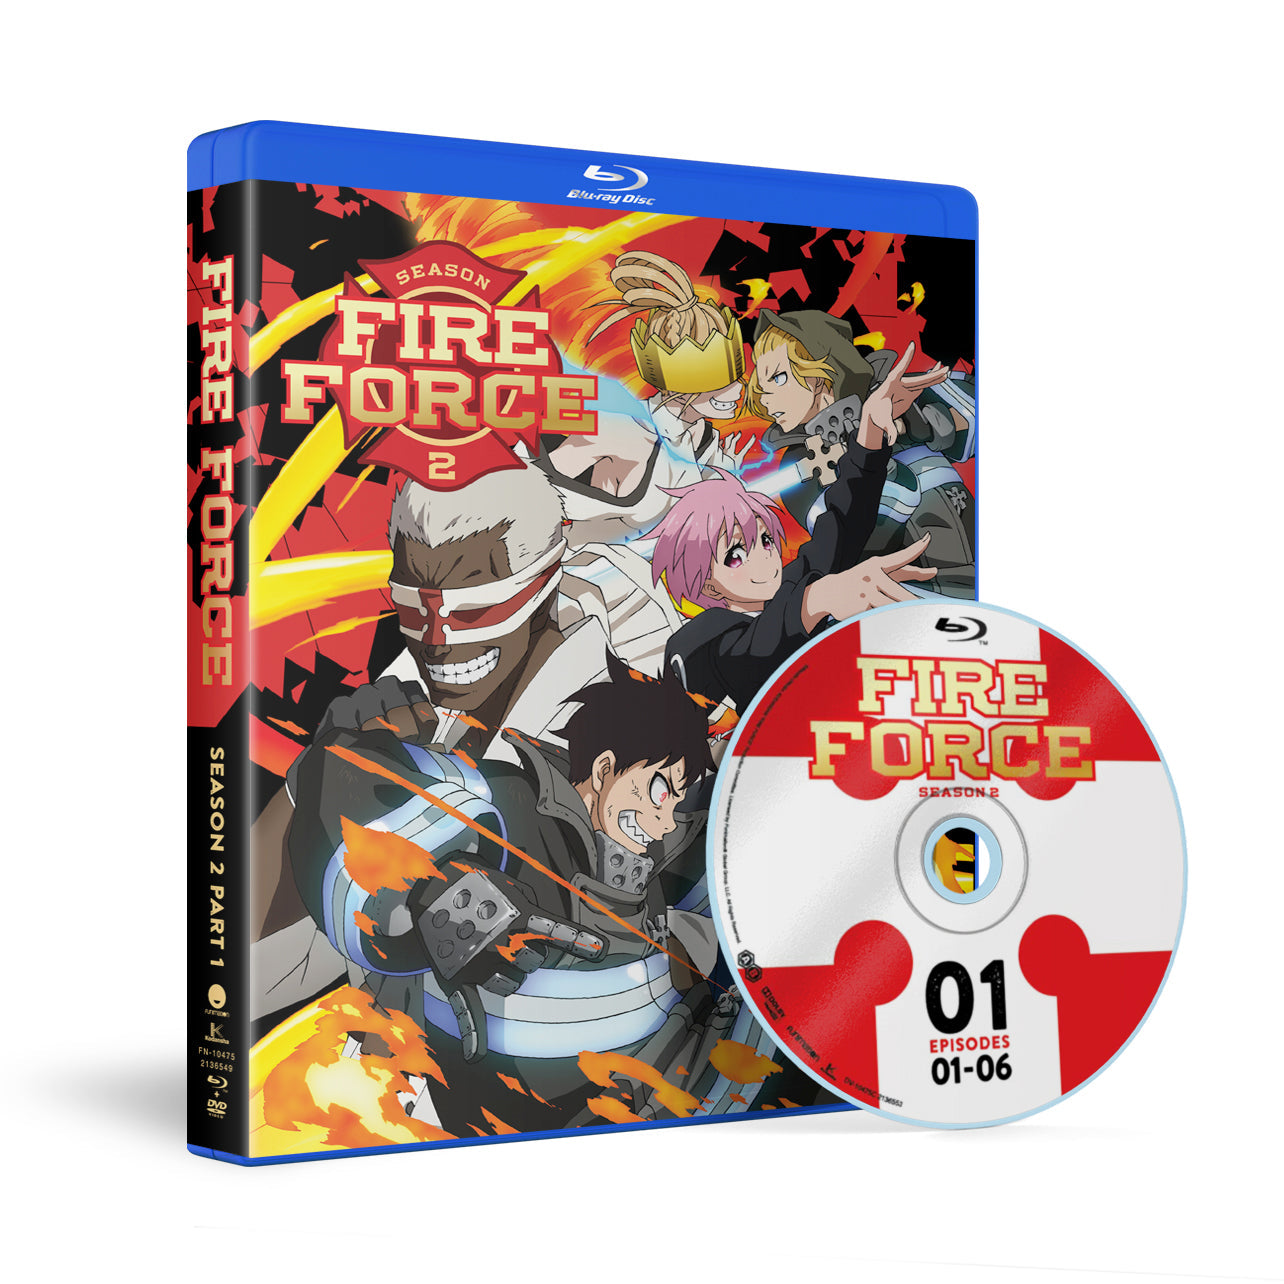 Fire Force - Season 2 Part 1 - Blu-ray + DVD image count 1